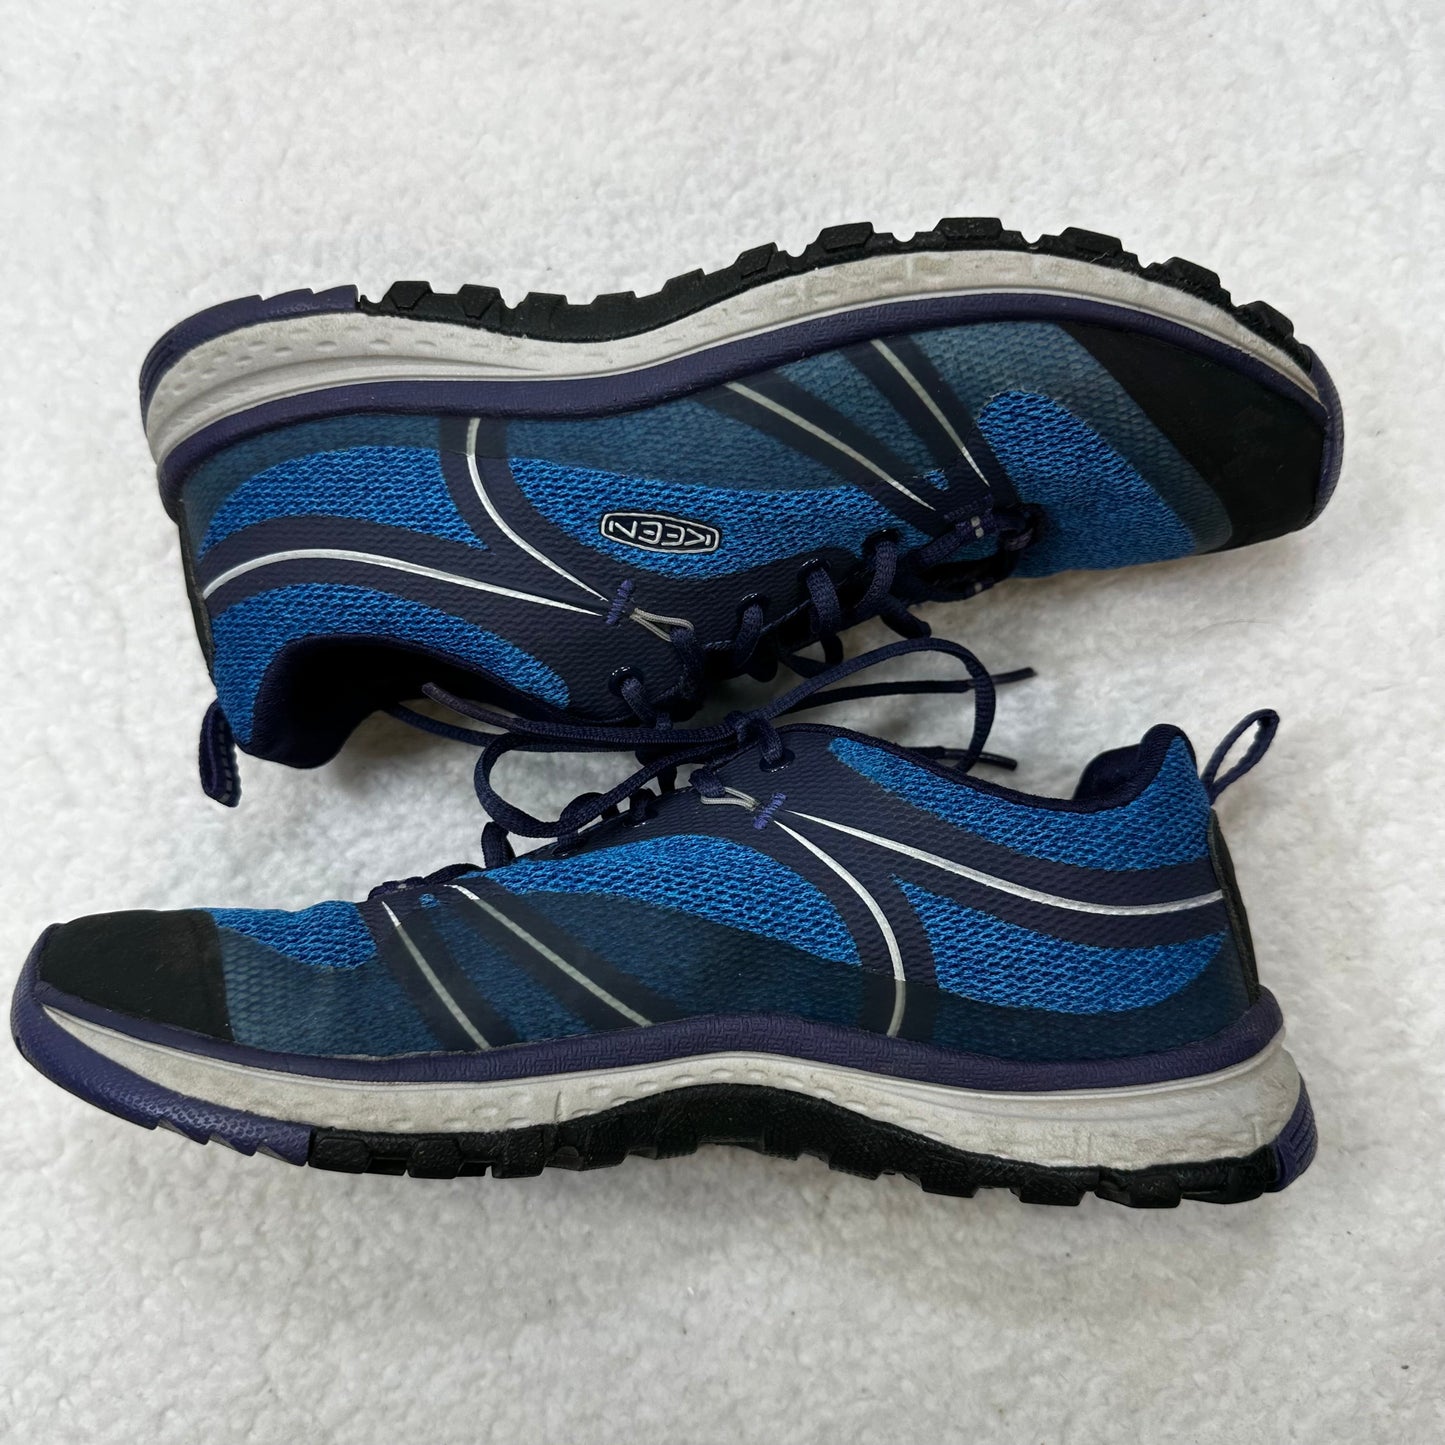 Blue Shoes Sneakers Keen, Size 8